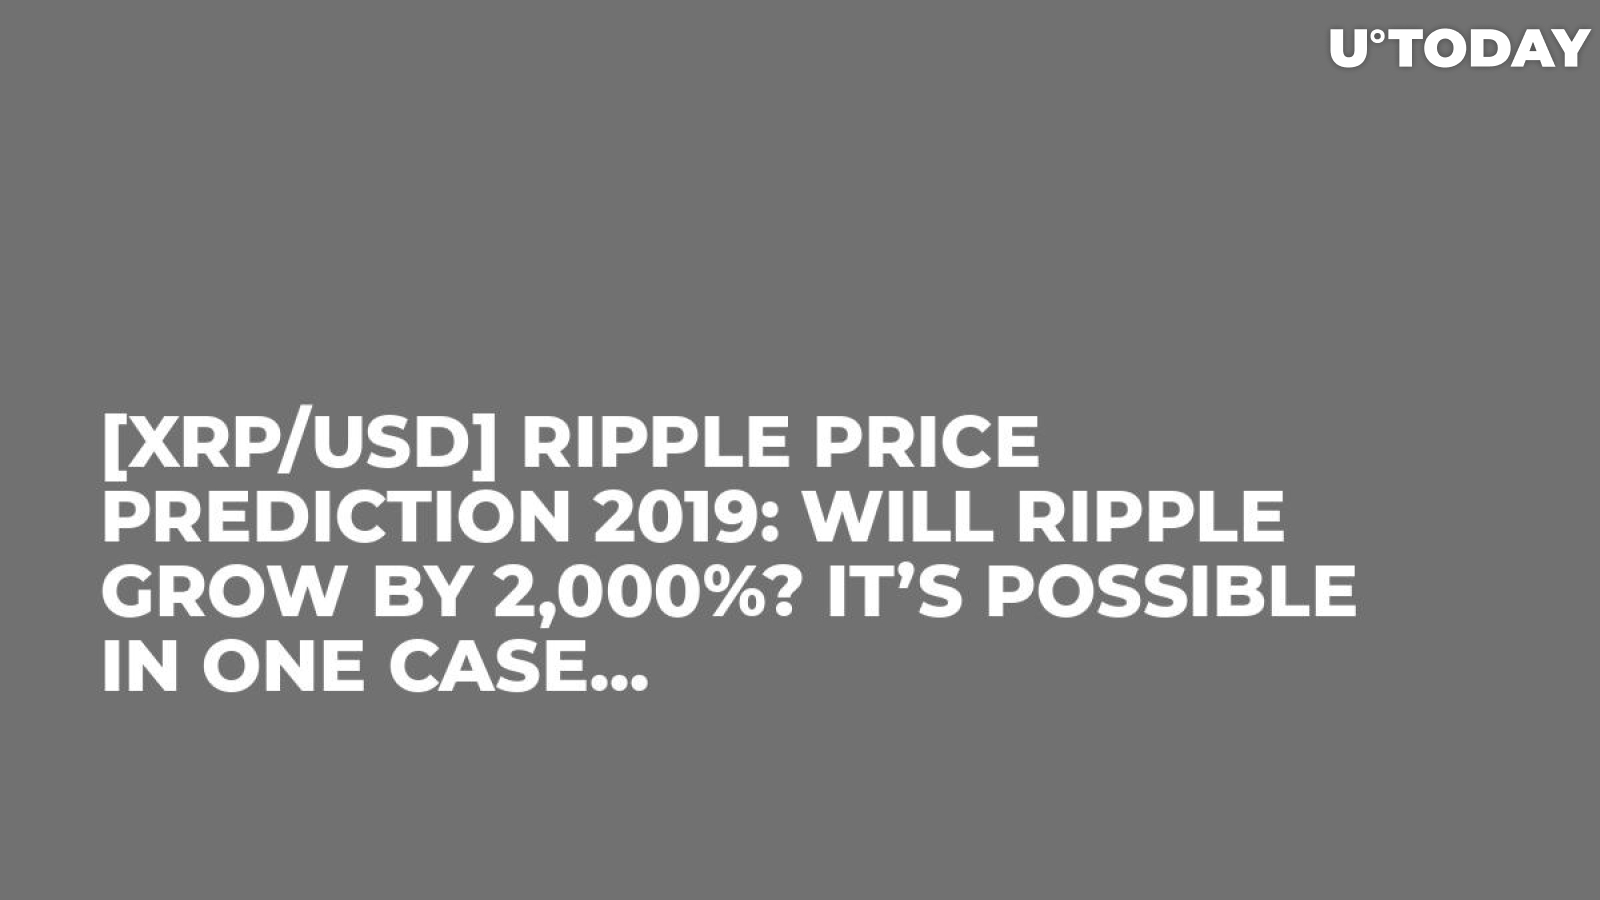 [XRP/USD] Ripple Price Prediction 2019: Will Ripple Grow By 2,000%? It’s Possible in One Case...